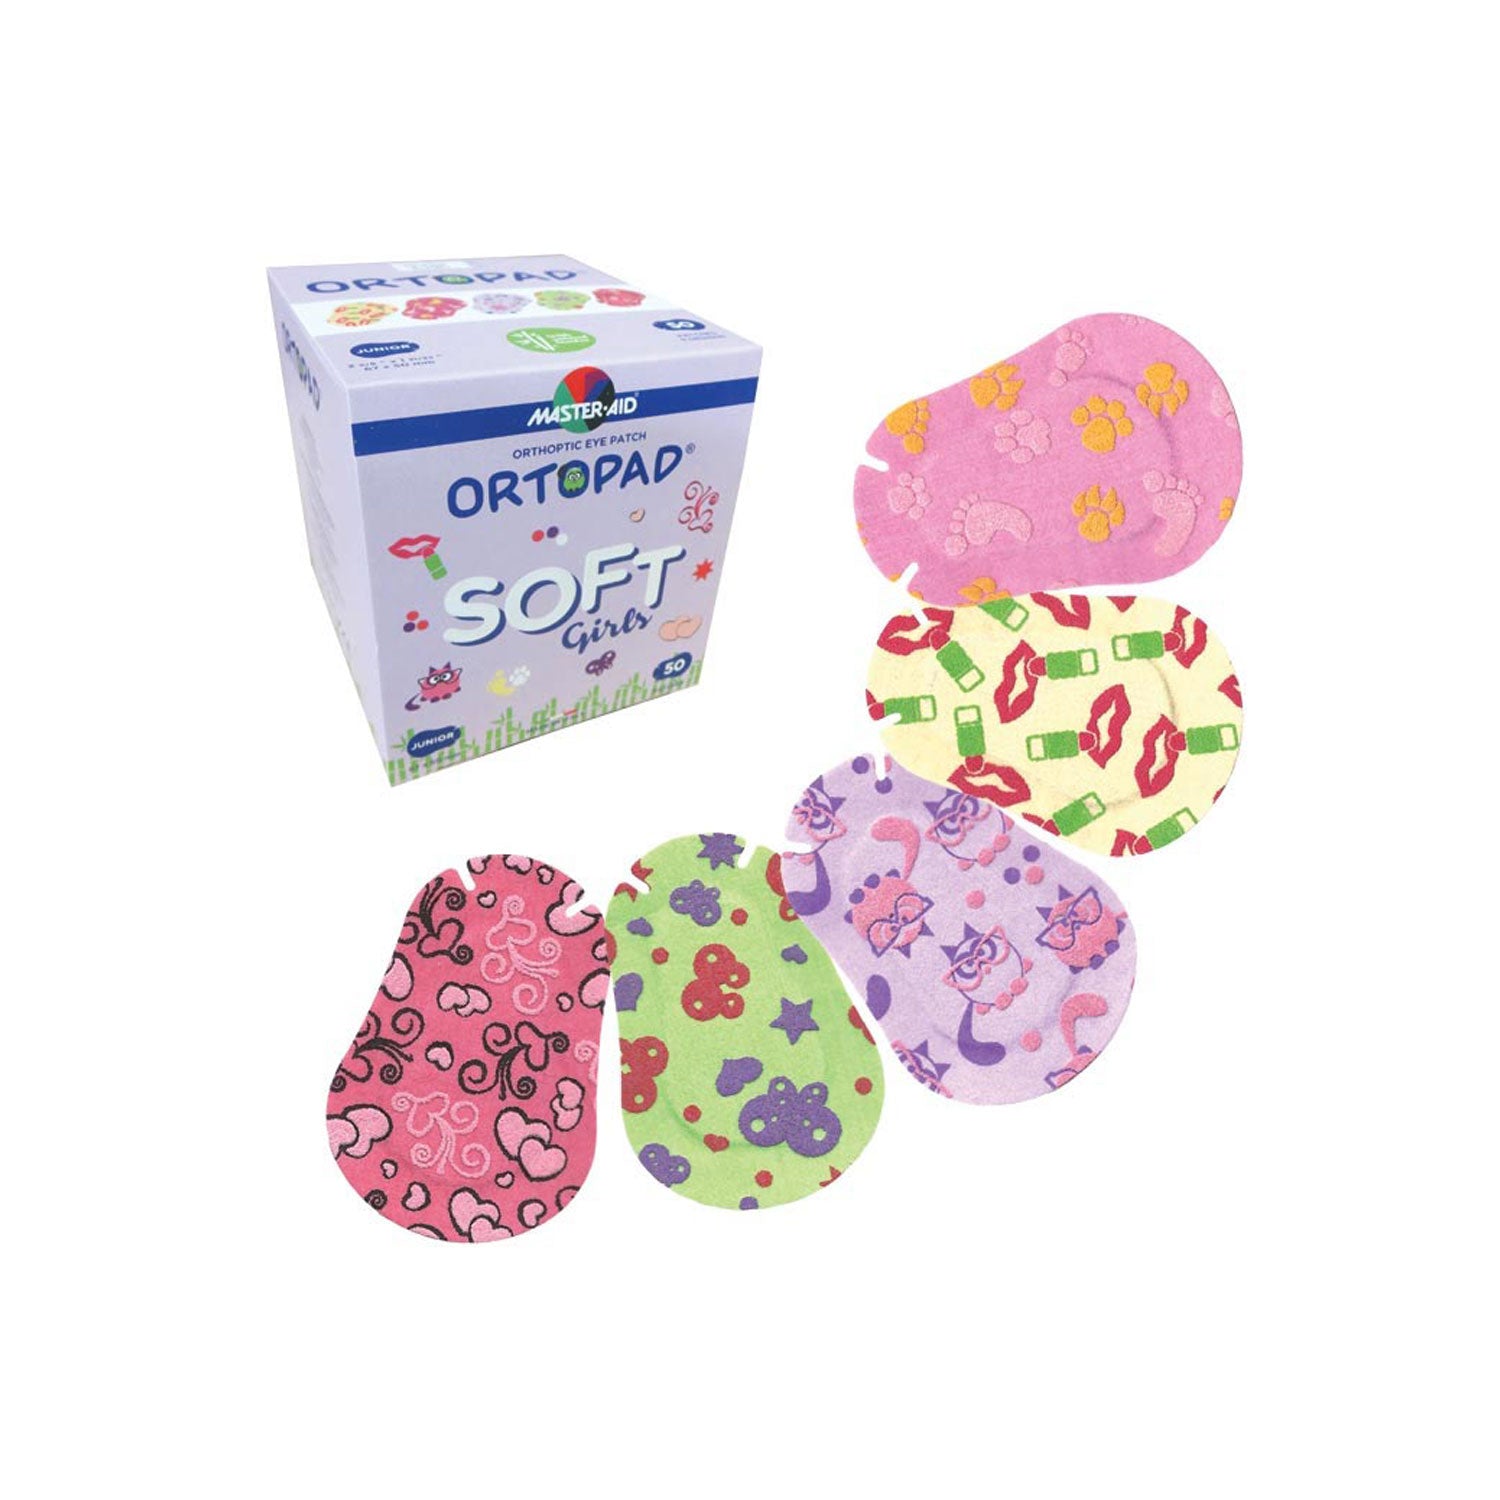 Ortopad® Soft Bamboo for Girls, 50/box - TEXTURED ACCENTS!